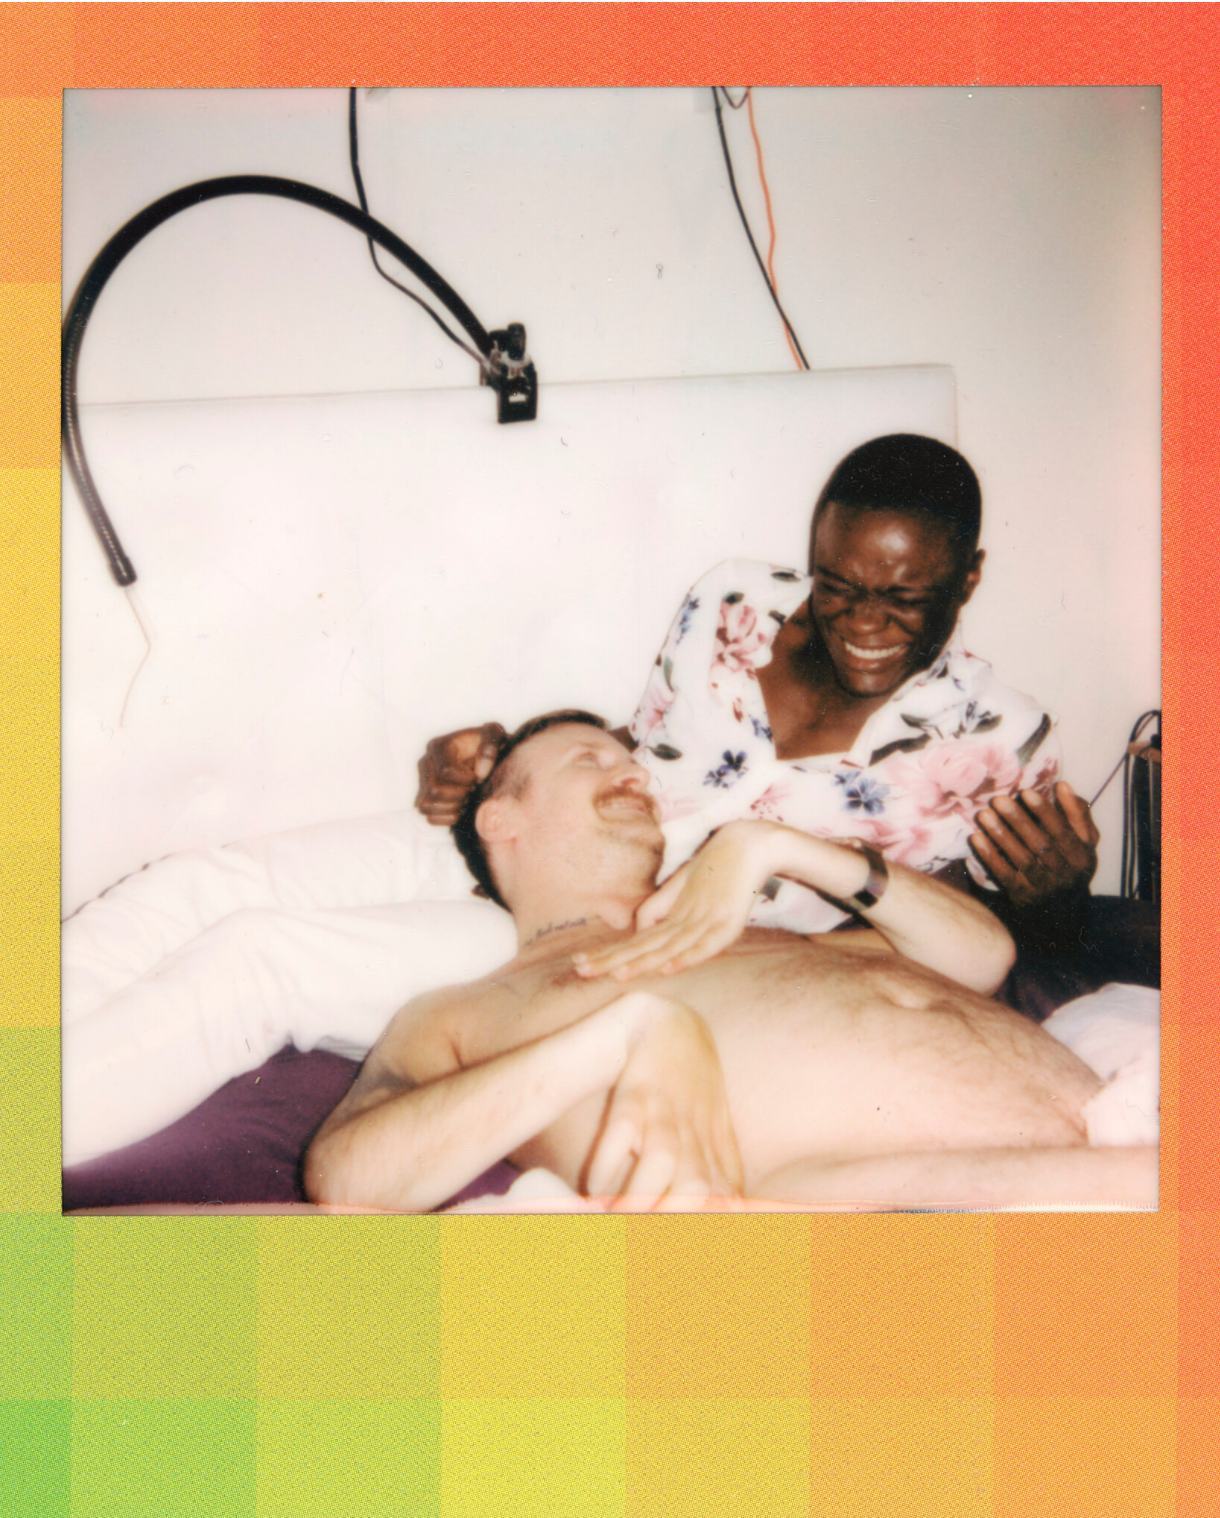 untitled, 2021.  [Image description: A polaroid photograph of two men lying on a bed and laughing. One of them, a white naked man, is the artist Robert Andy Coombs. His head is resting on the lap of his friend Marshall, a Black man wearing a shirt with flowers and white trousers, Behind them, a sip-and-puff-device and cables are attached to the headrest. The frame of the polaroid is colored in grades of green to orange.] 